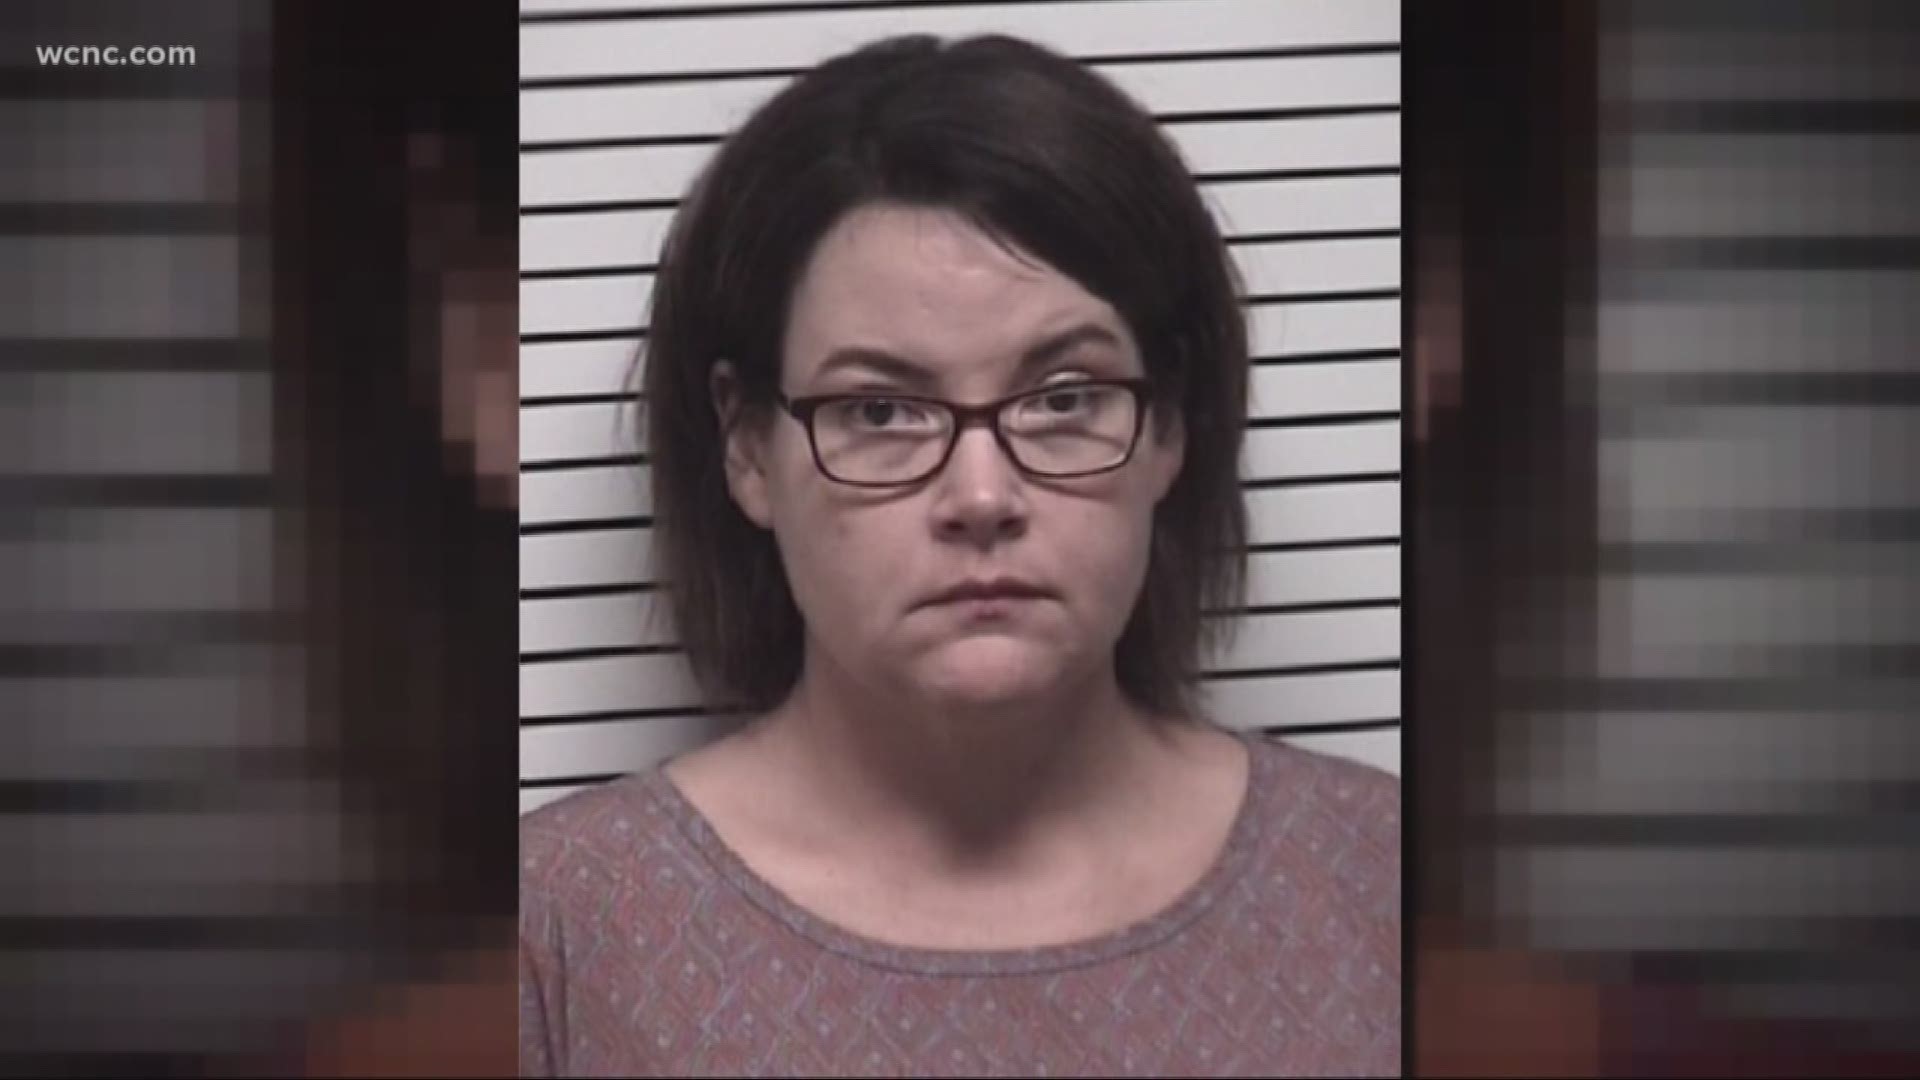 A Statesville teacher was arrested, accused of sex crimes with a minor. The minor was not one of her students.